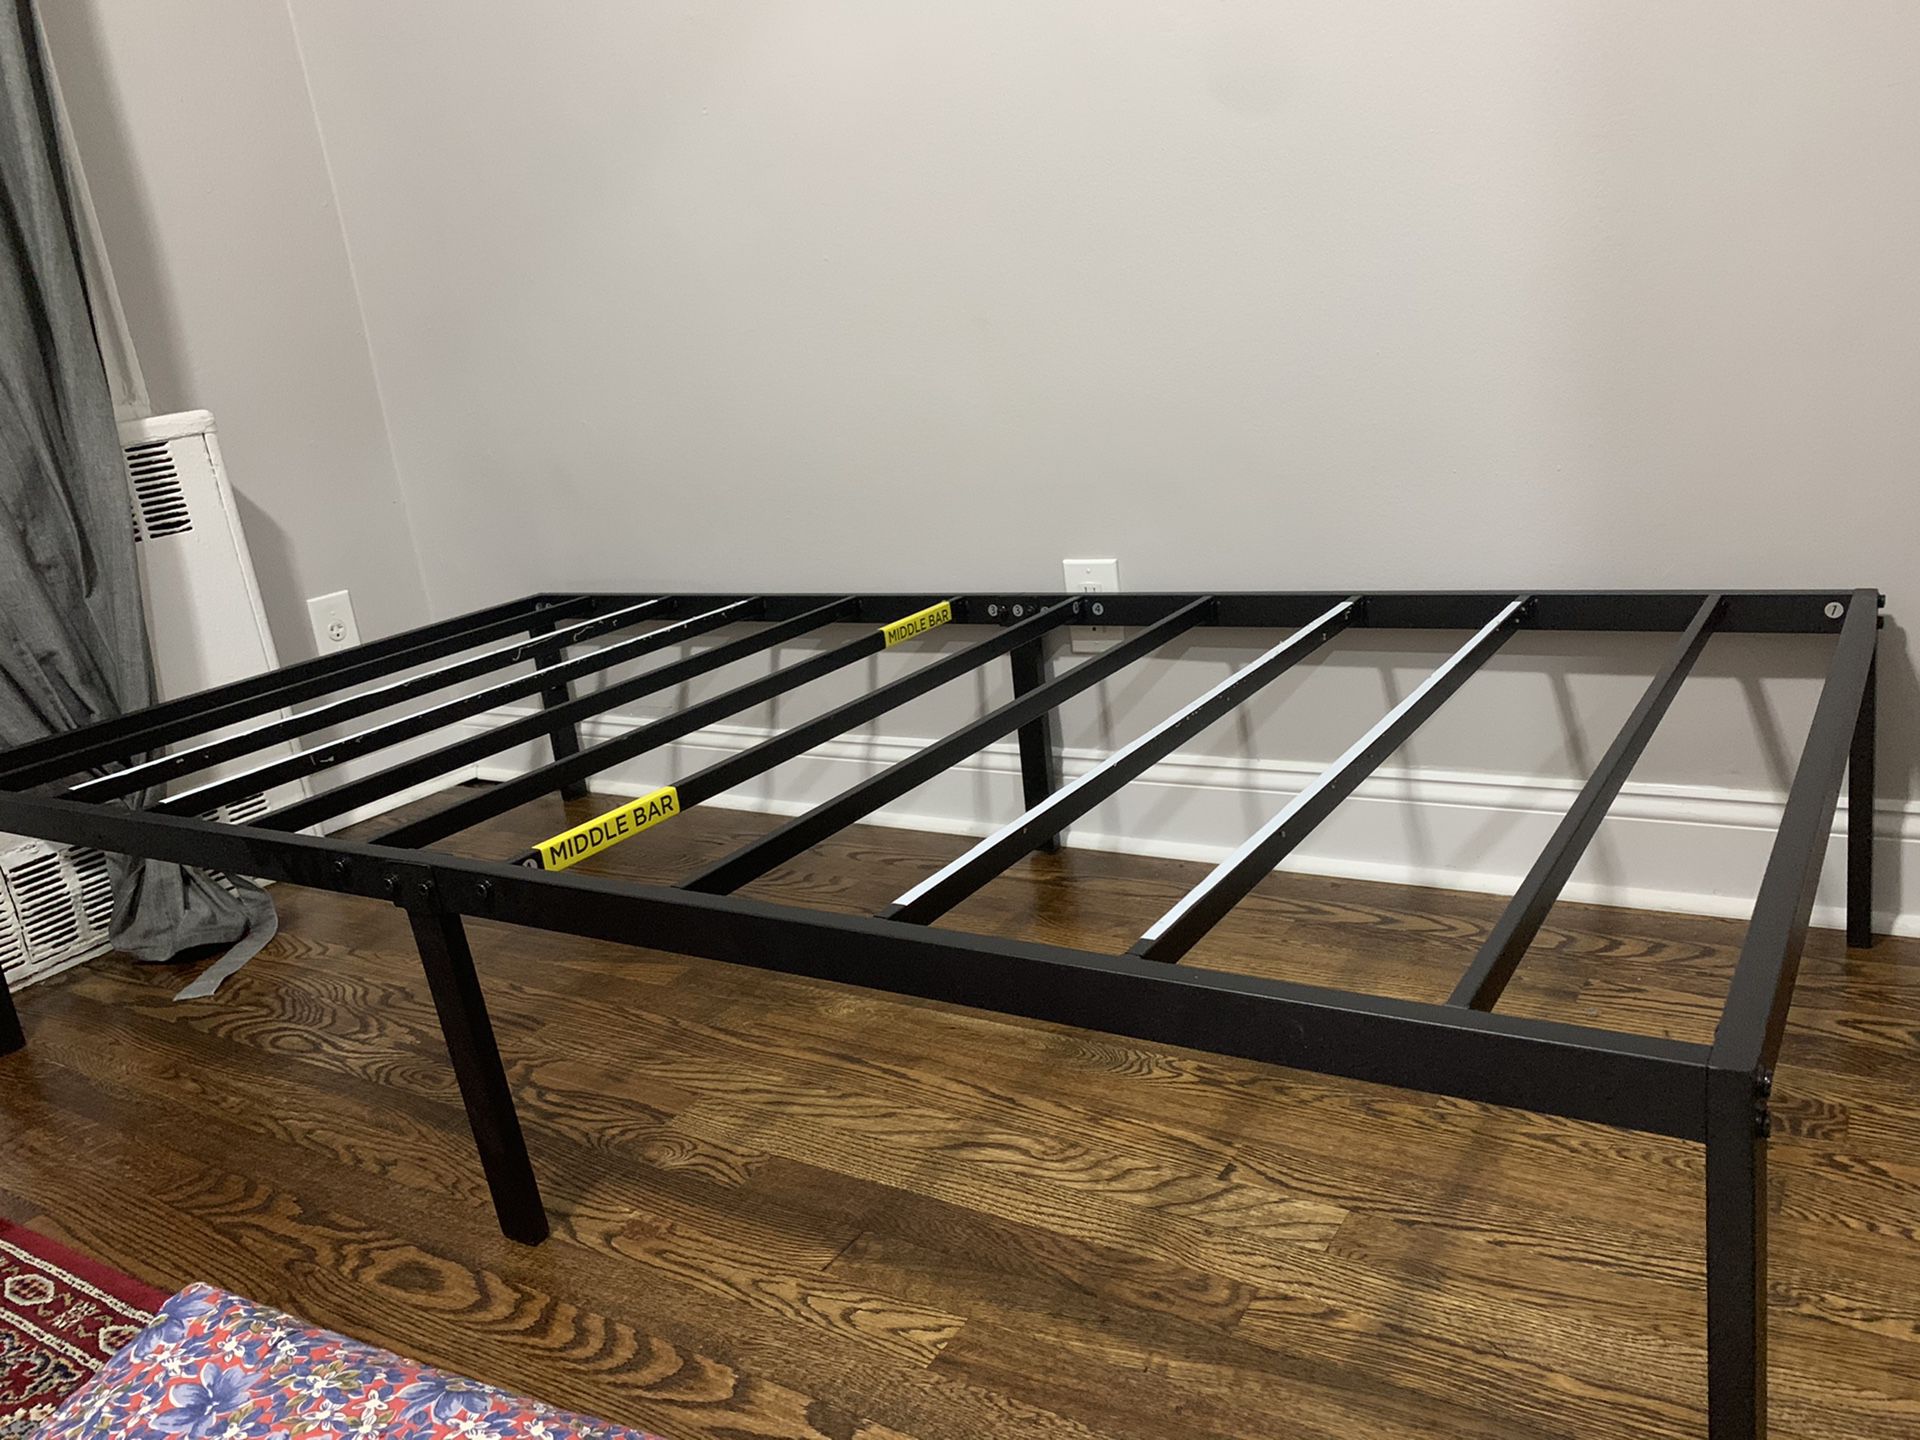 Twin bed frame